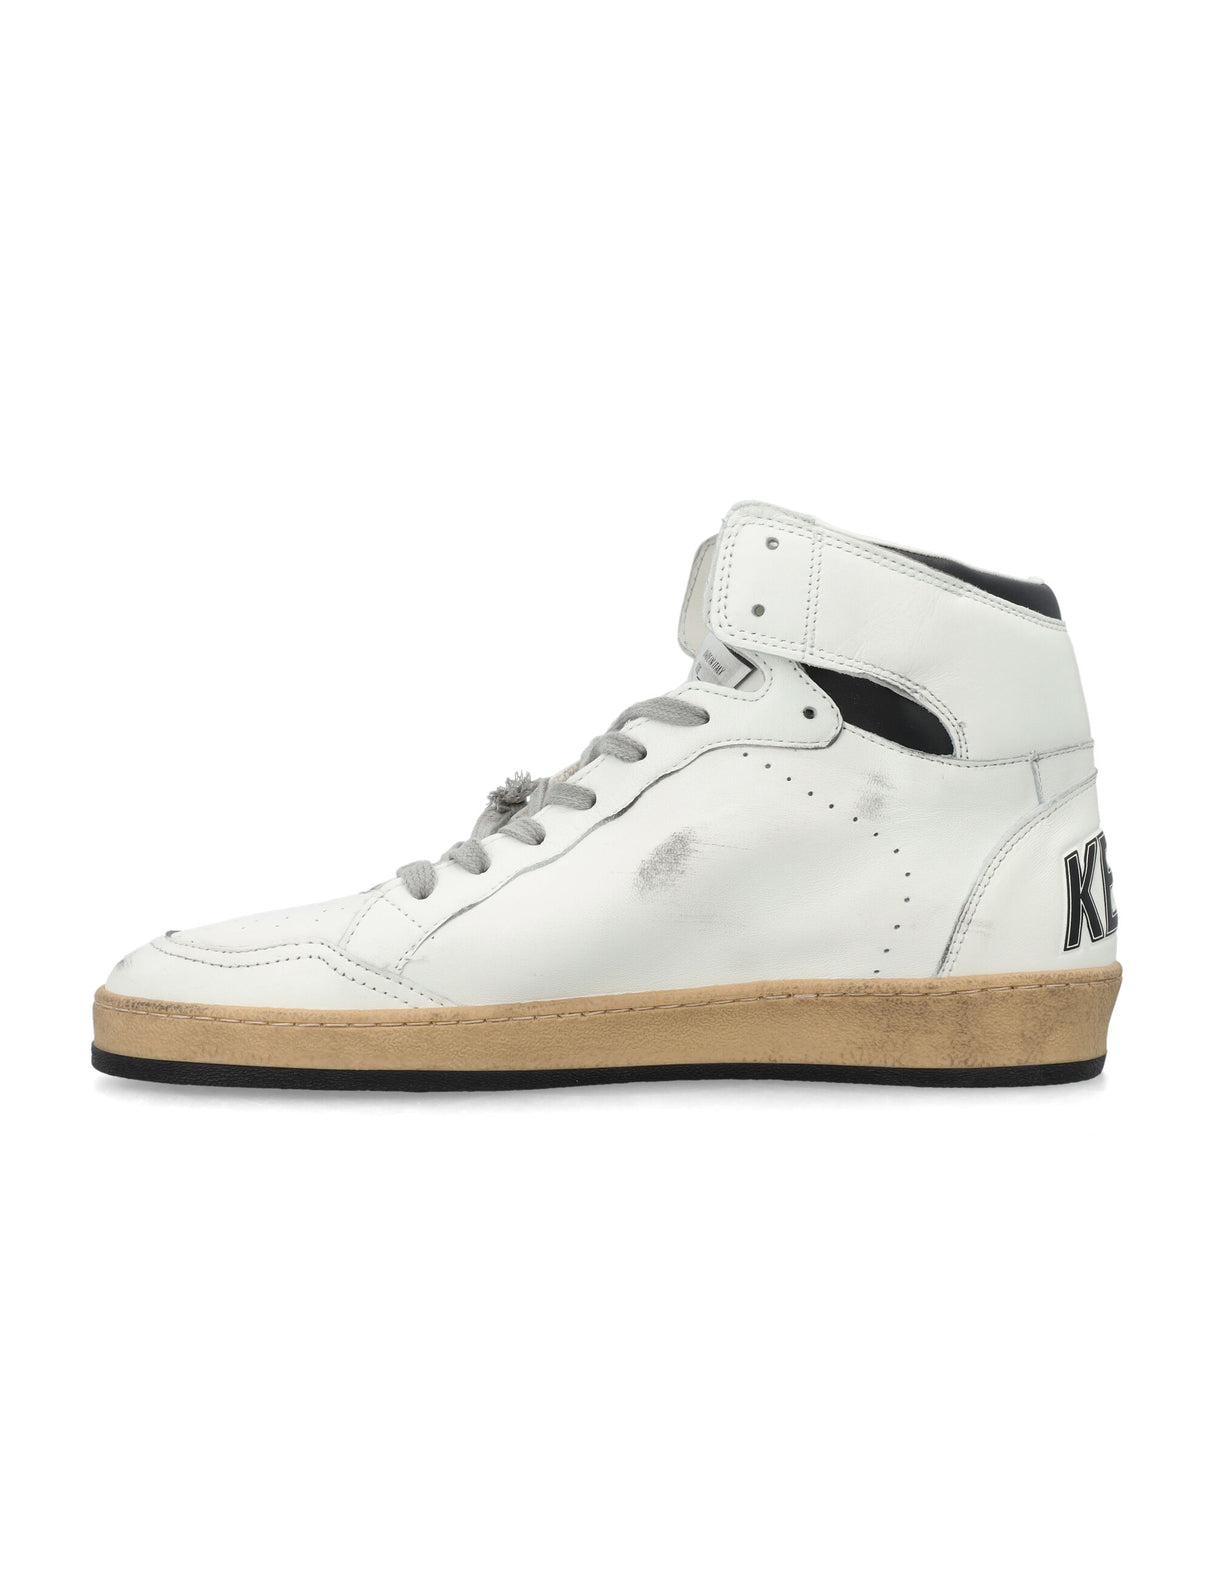 GOLDEN GOOSE MEN'S HIGH-TOP SNEAKERS WITH PERFORATED DETAILS AND VINTAGE EFFECT